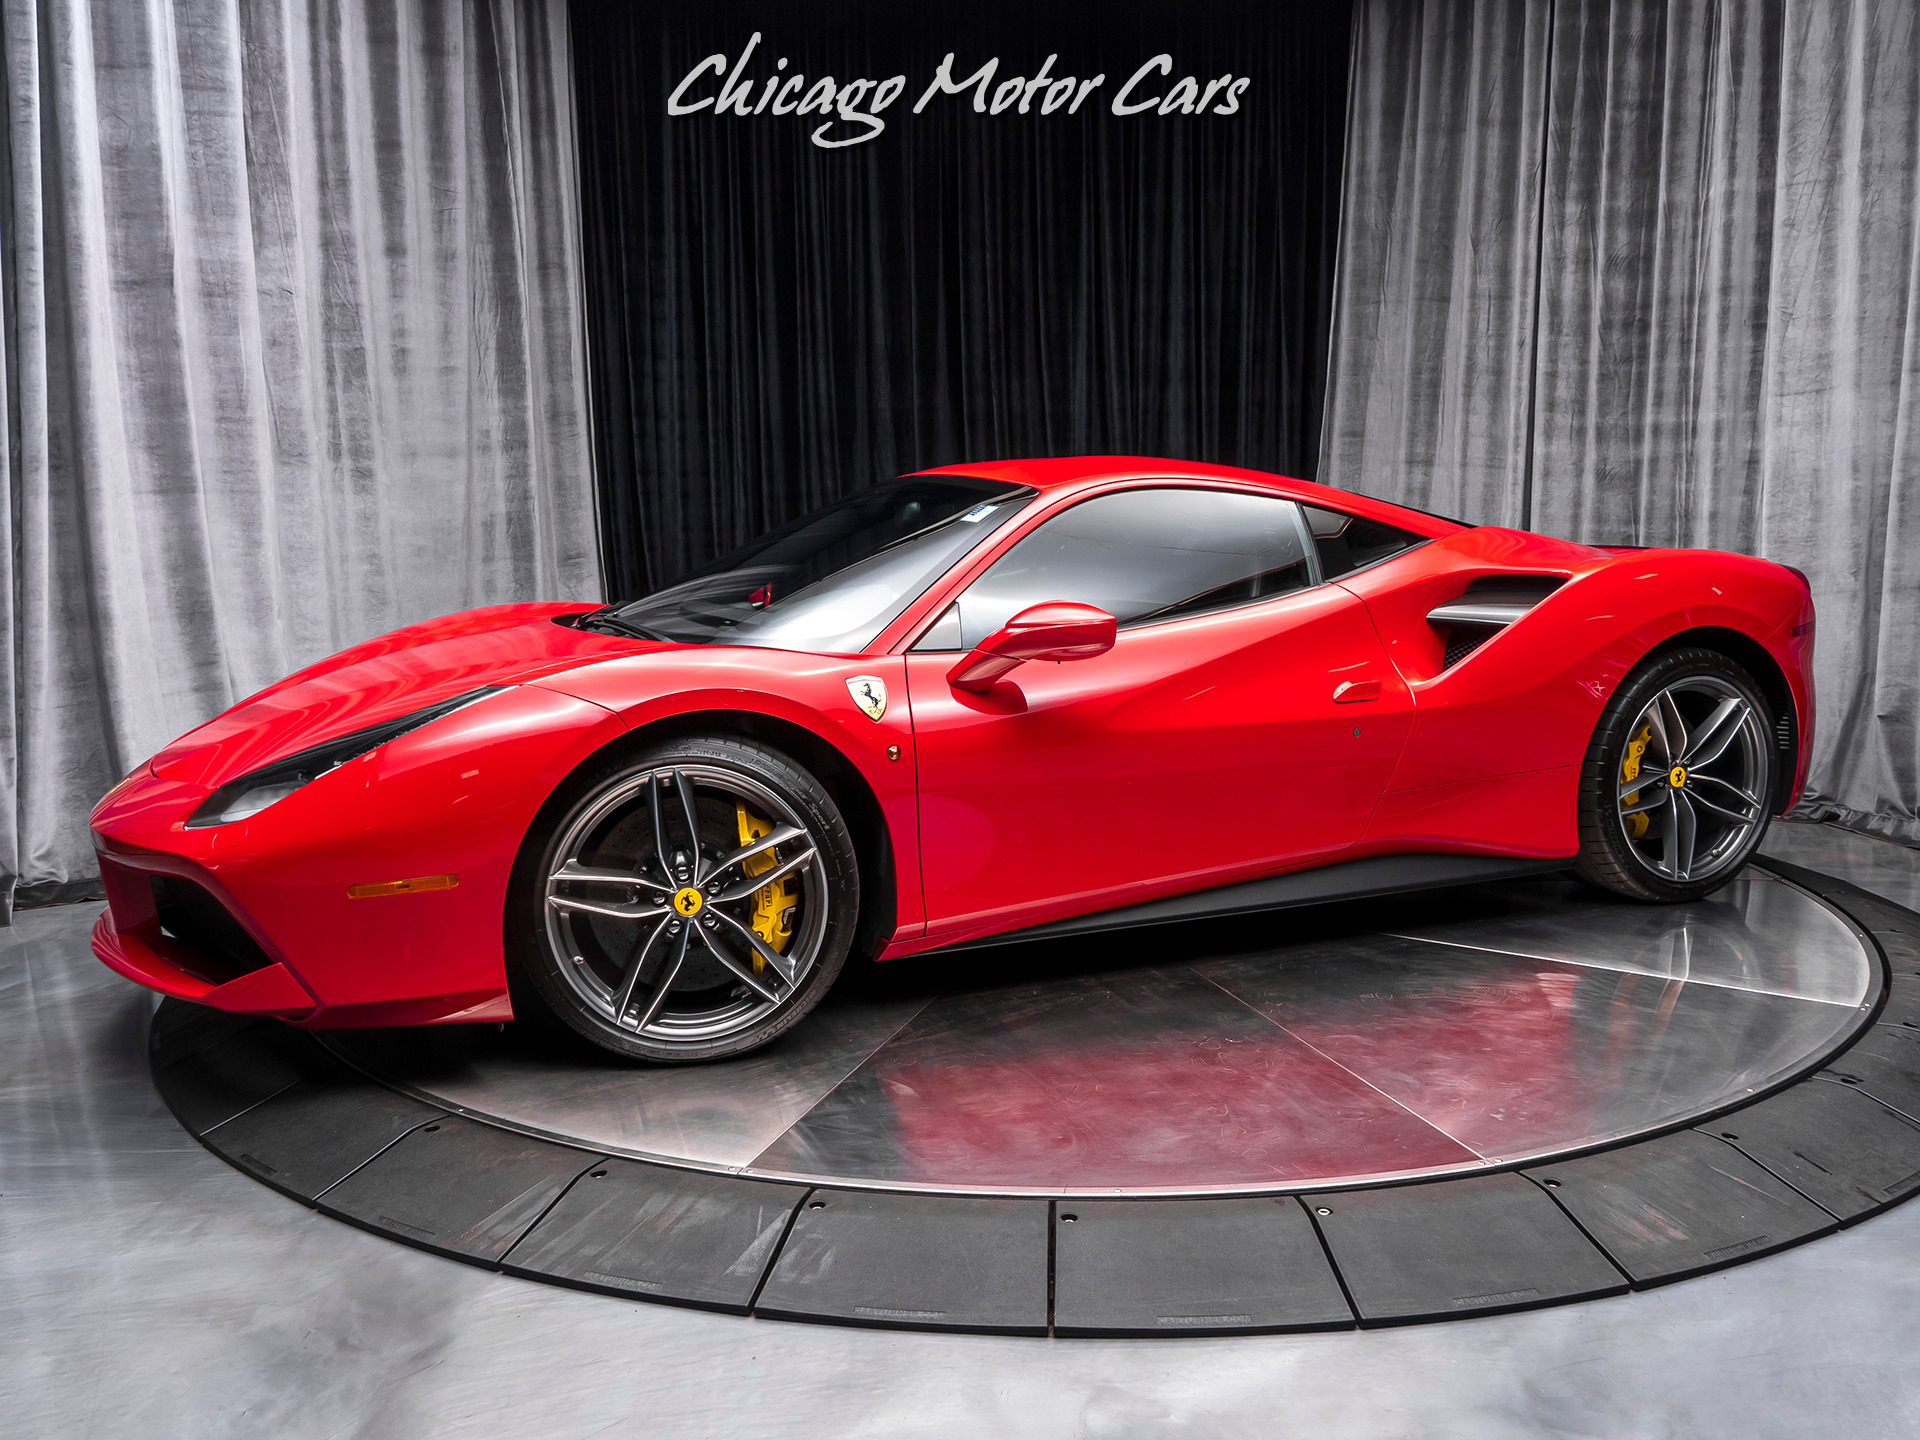 Used 2017 Ferrari 488 Gtb Coupe Original Msrp 318k Carbon Fiber Front Lift For Sale Special Pricing Chicago Motor Cars Stock 15846b